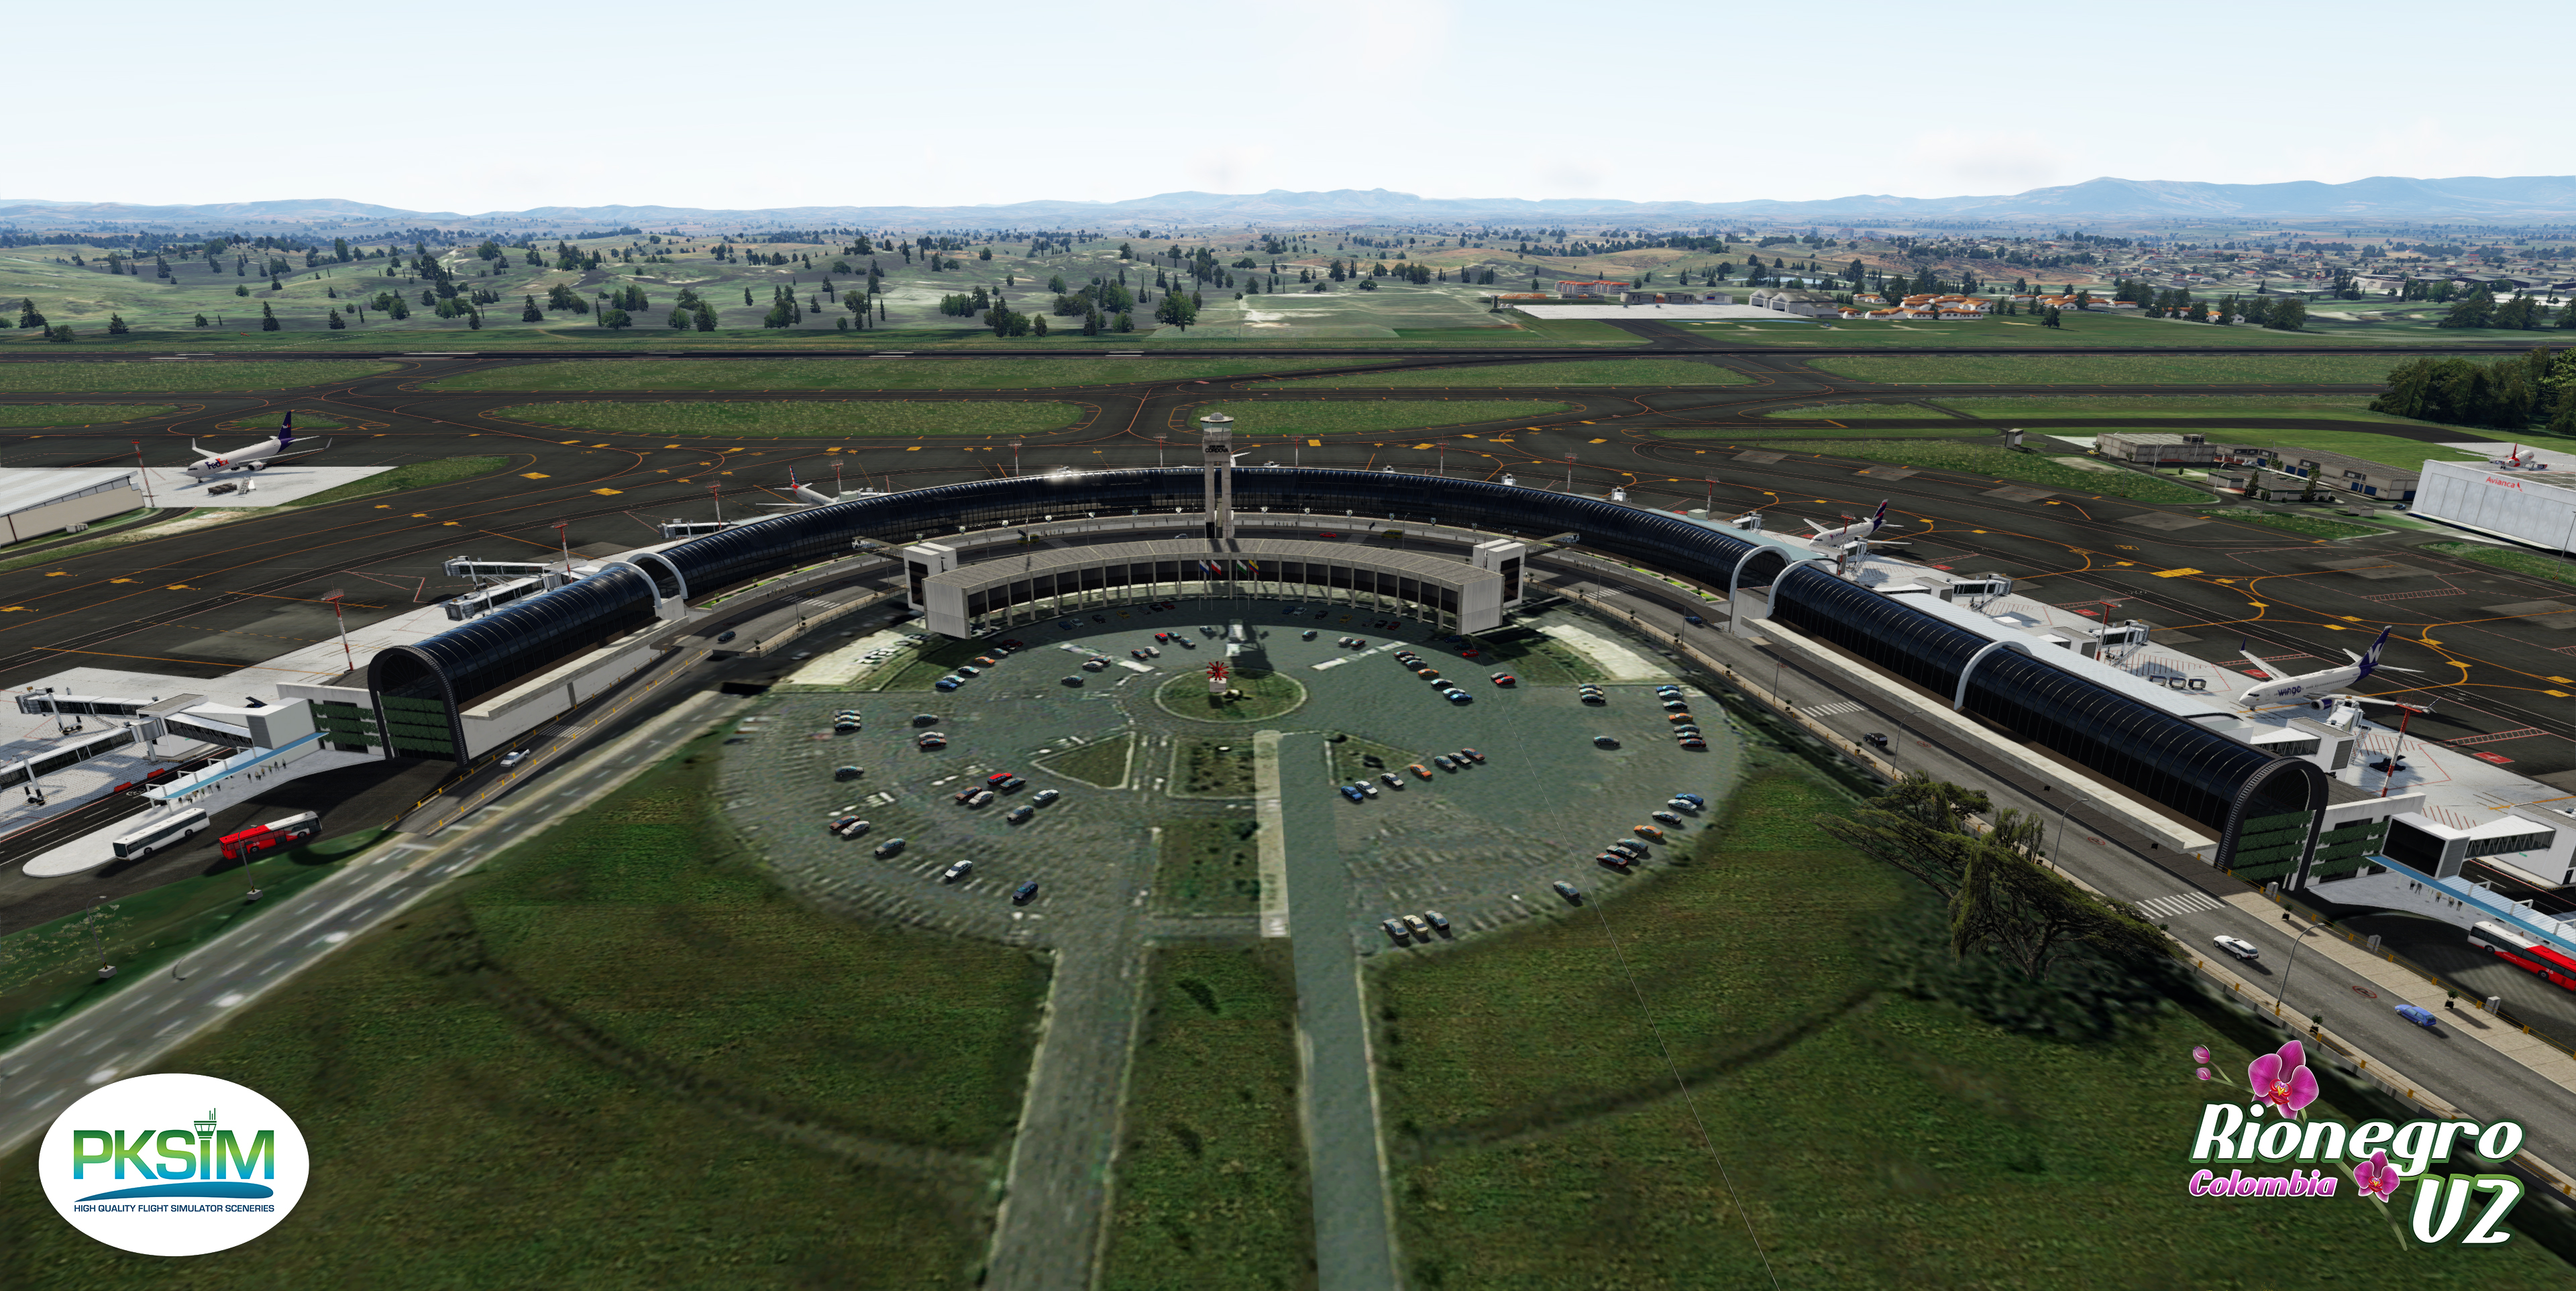 PKSIM Releases Rionegro International Airport V2 for P3D